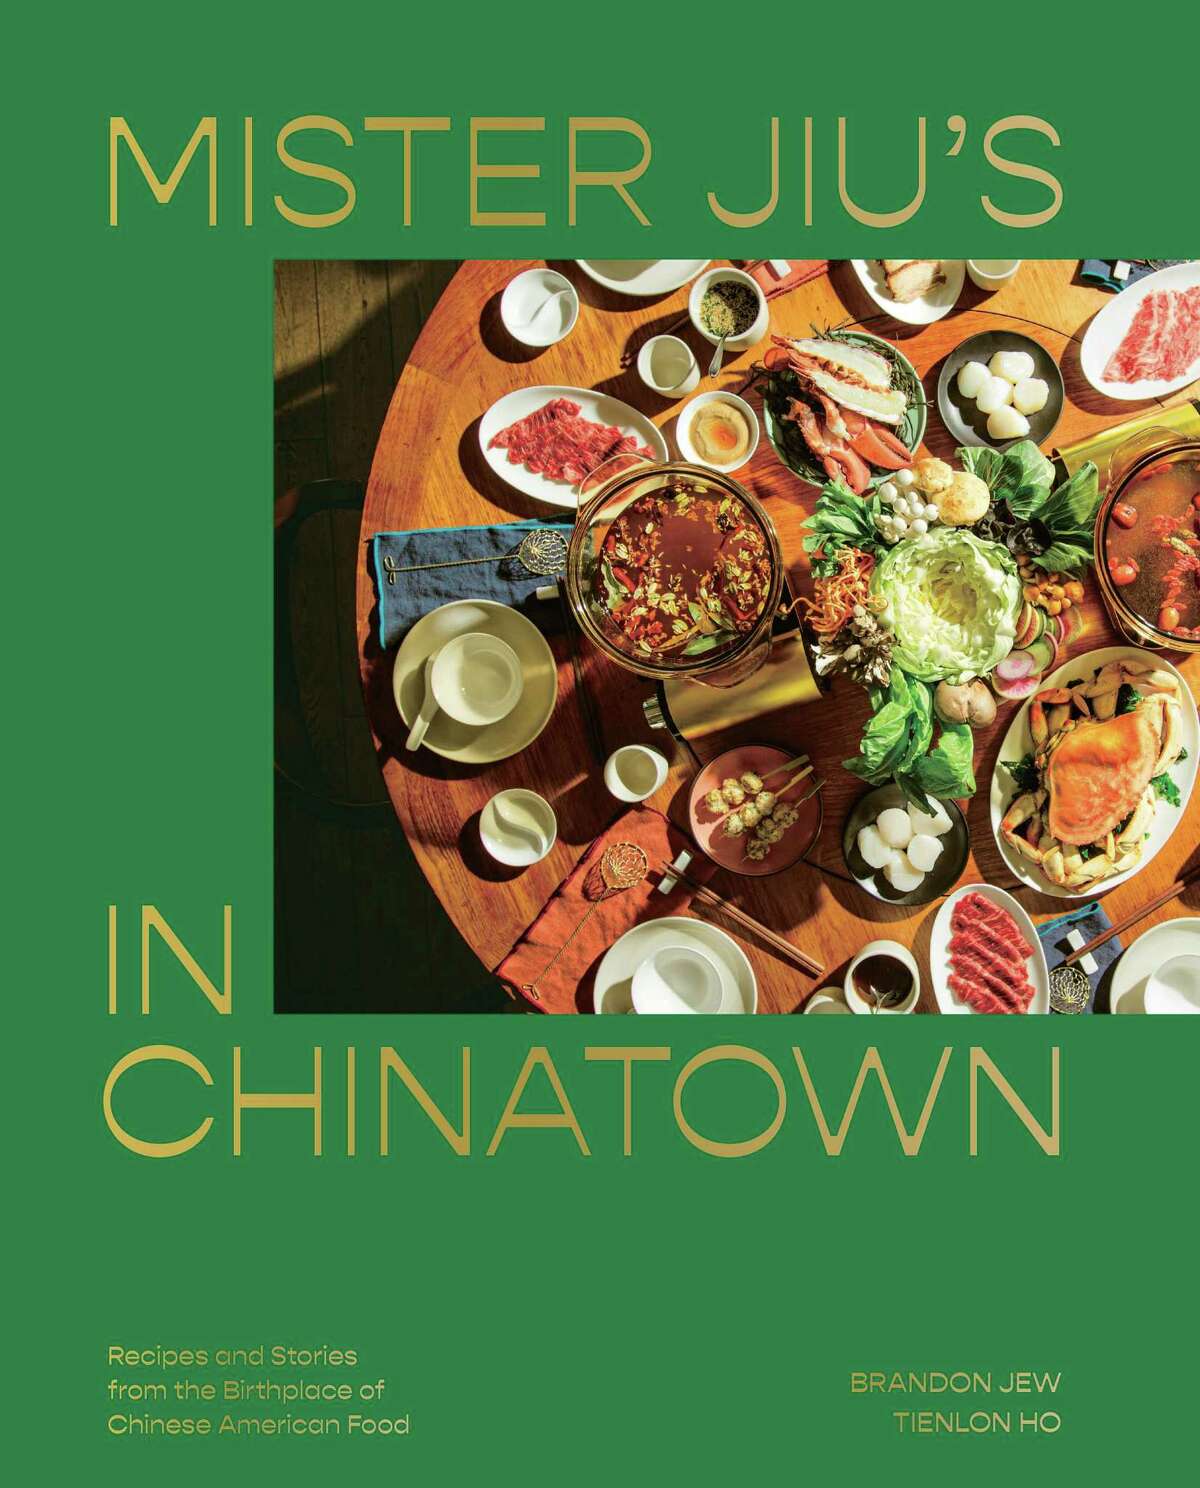 The cover of “Mister Jiu’s in Chinatown: Recipes and Stories From the Birthplace of Chinese American Food” by Brandon Jew and Tienlon Ho.